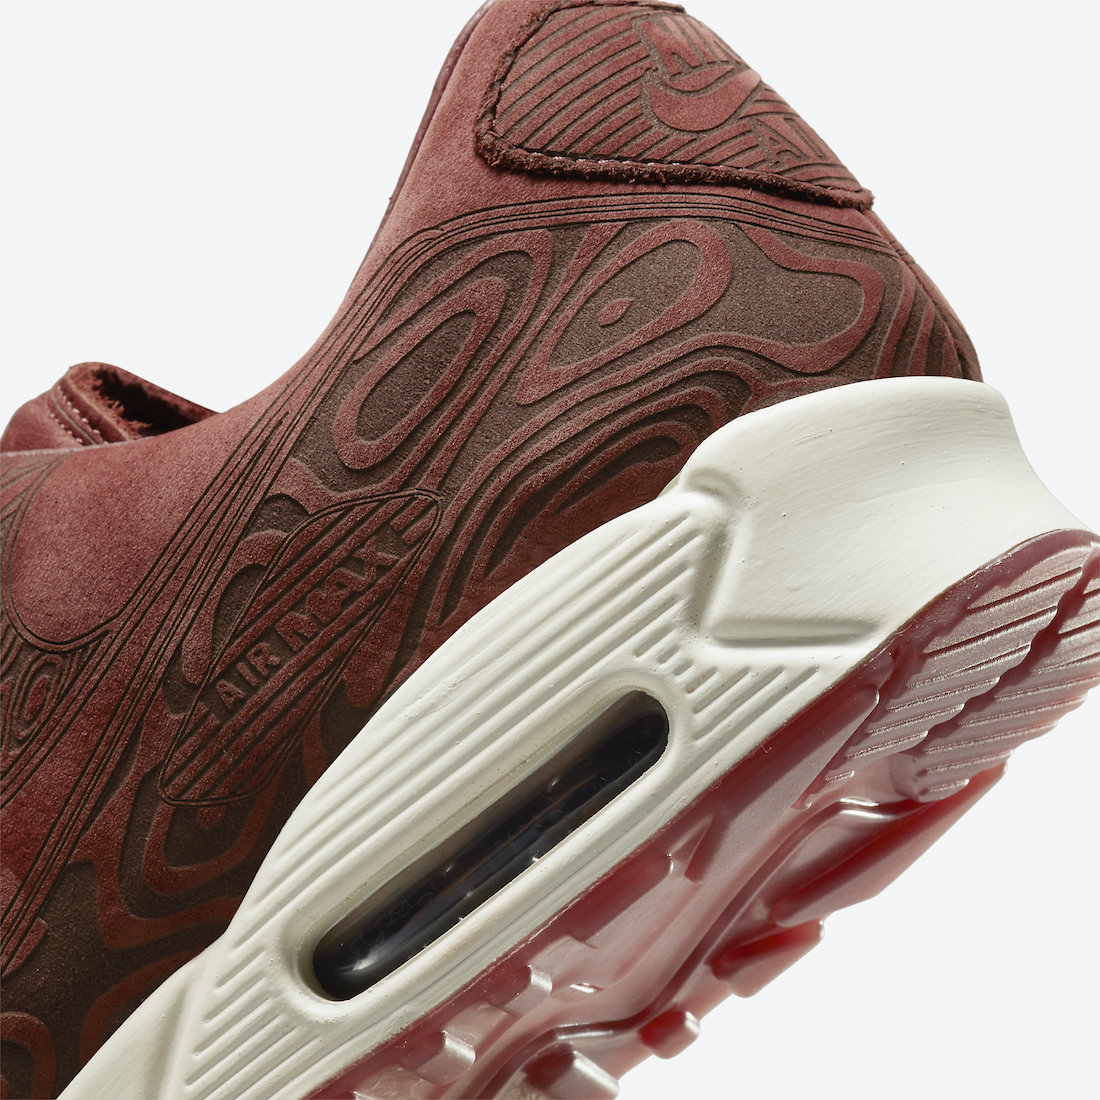 Nike Air Max 90 Laser DH4689 200 Release Date 7